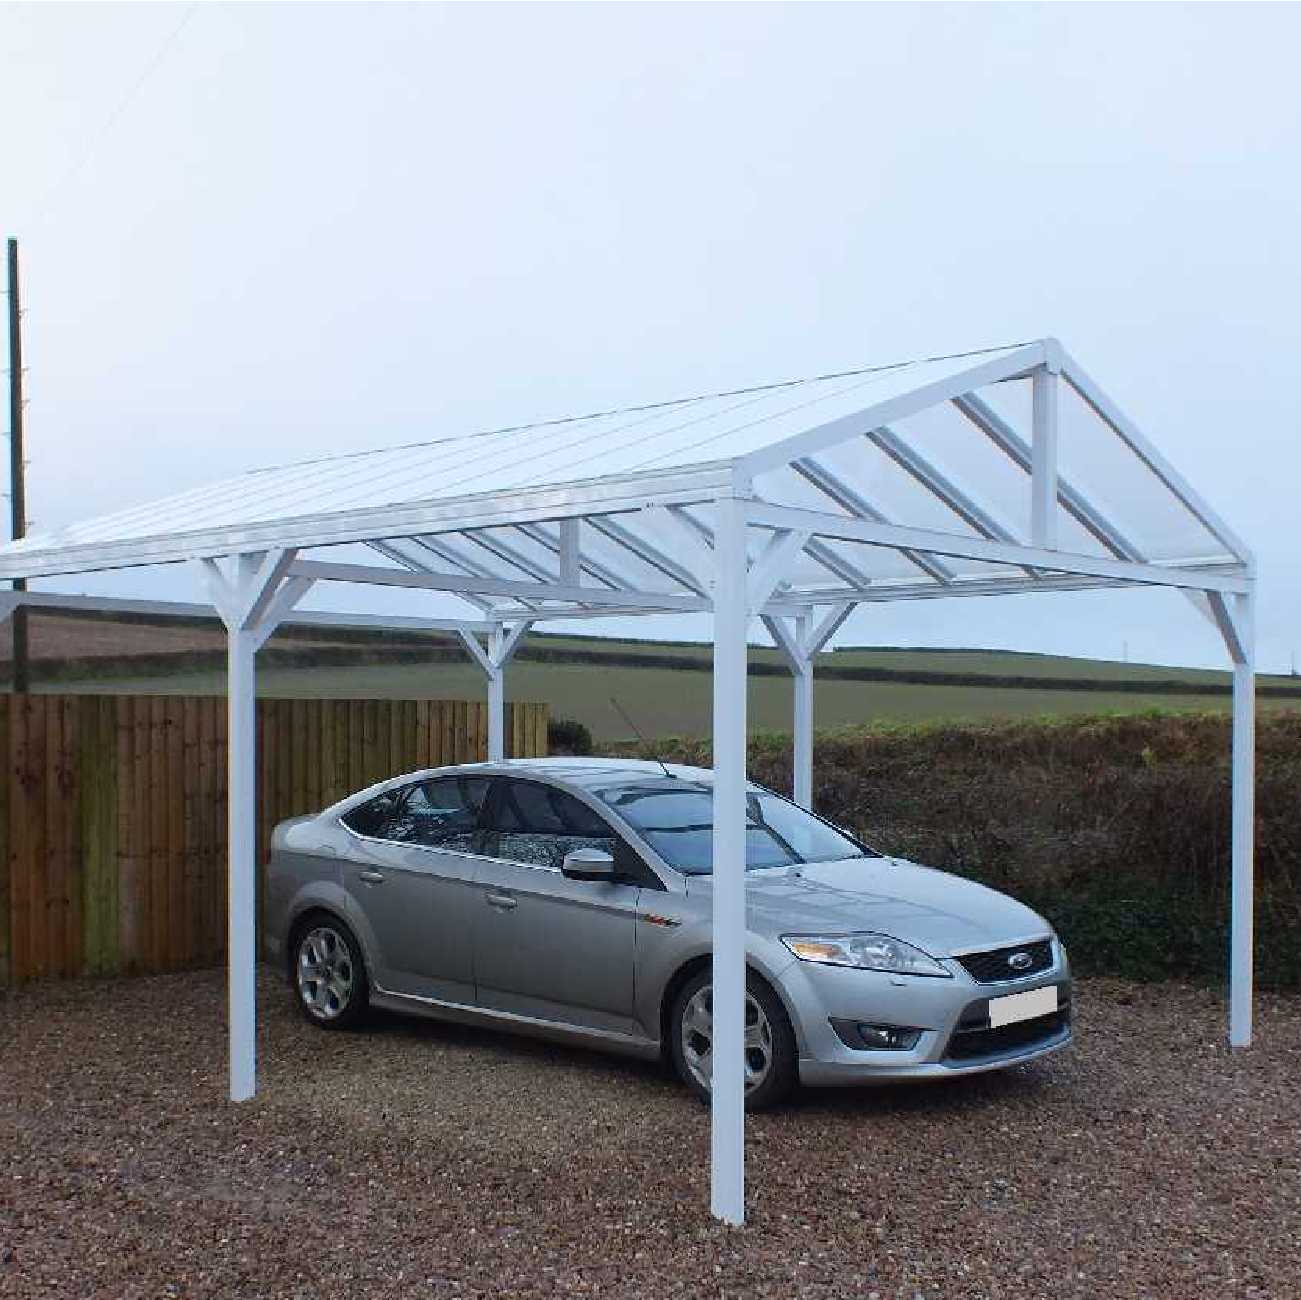 Affordable Omega Smart Free-Standing, White Gable-Roof (type 1) Canopy with 16mm Polycarbonate Glazing - 4.2m (W) x 4.0m (P), (6) Supporting Posts